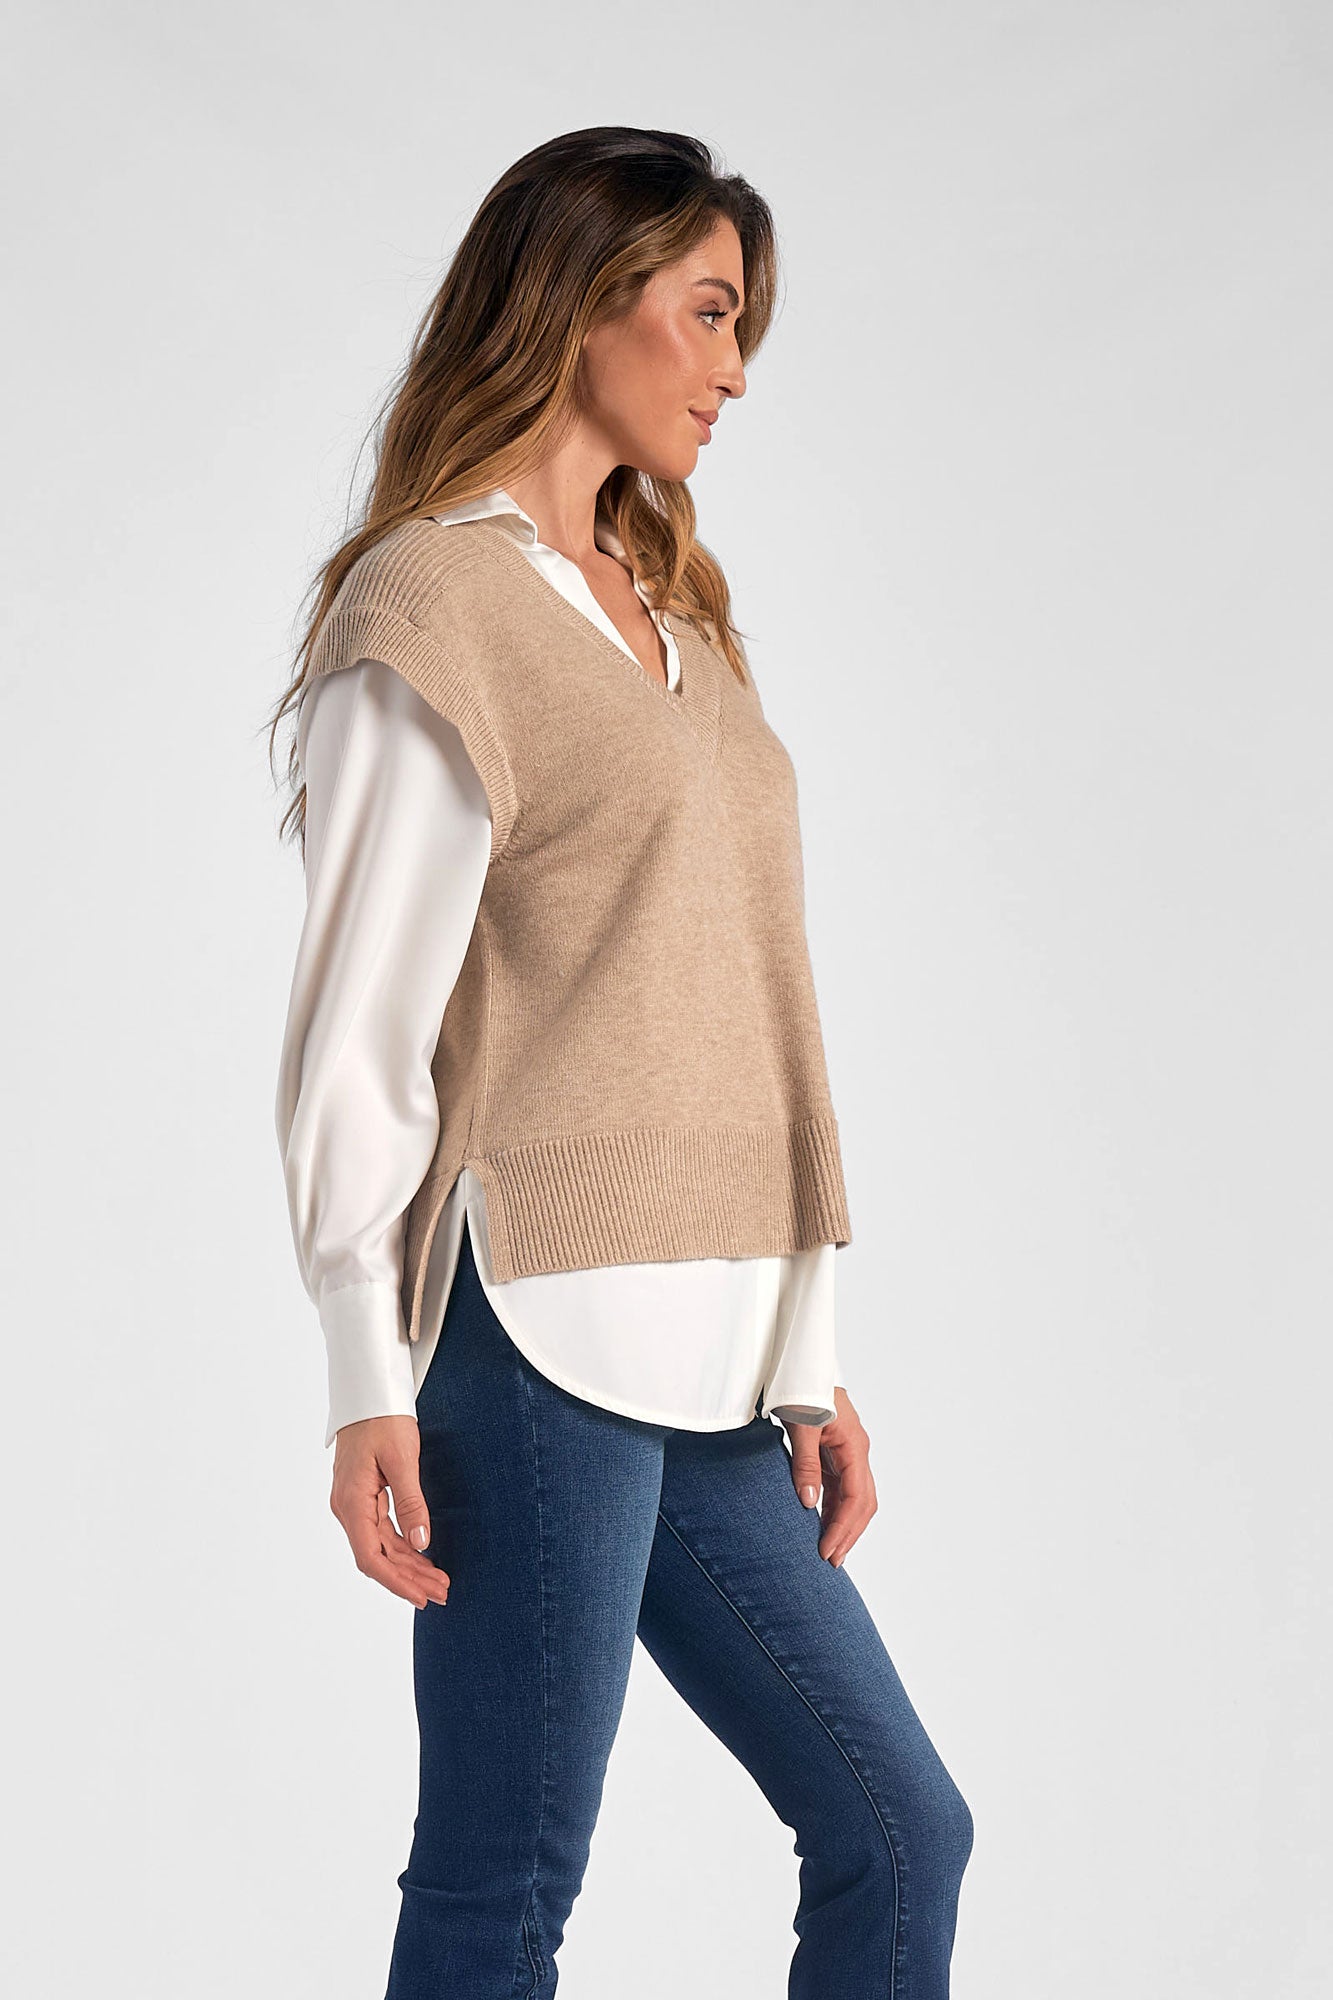 Sweater Vest & Blouse Top by Elan